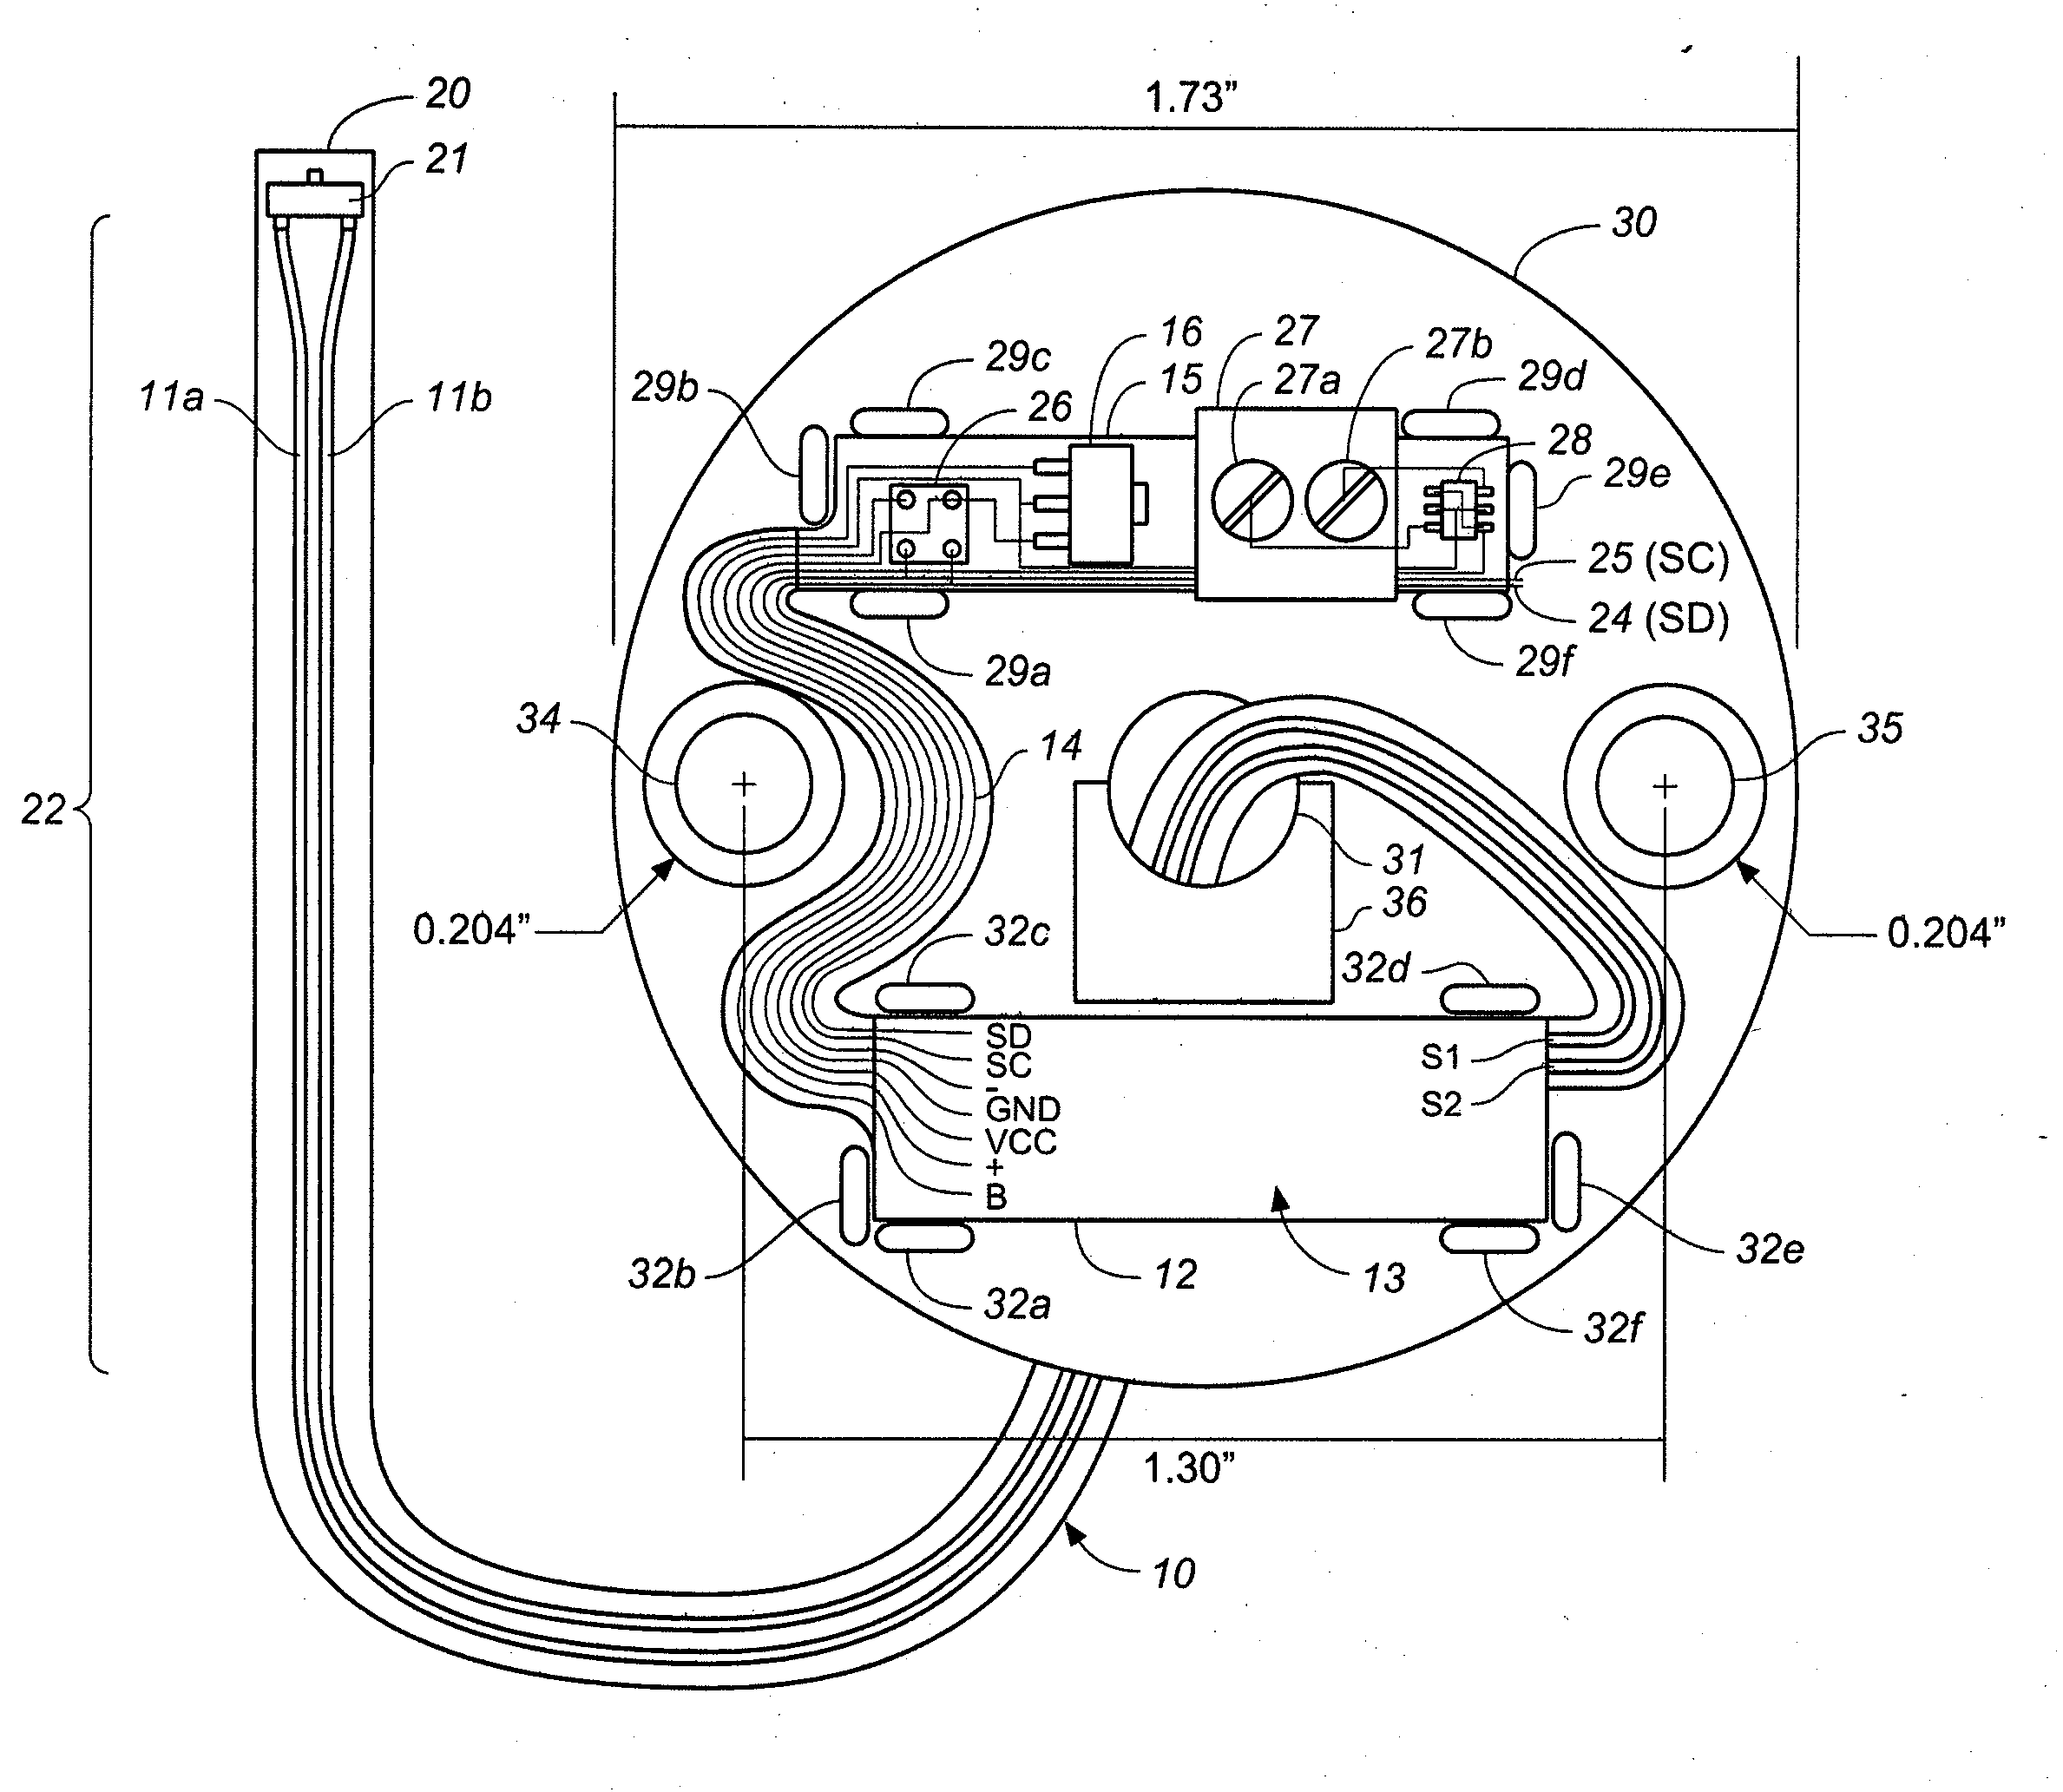 Temperature-sensing and transmitting assemblies, programmable temperature sensor units, and methods of making and using them